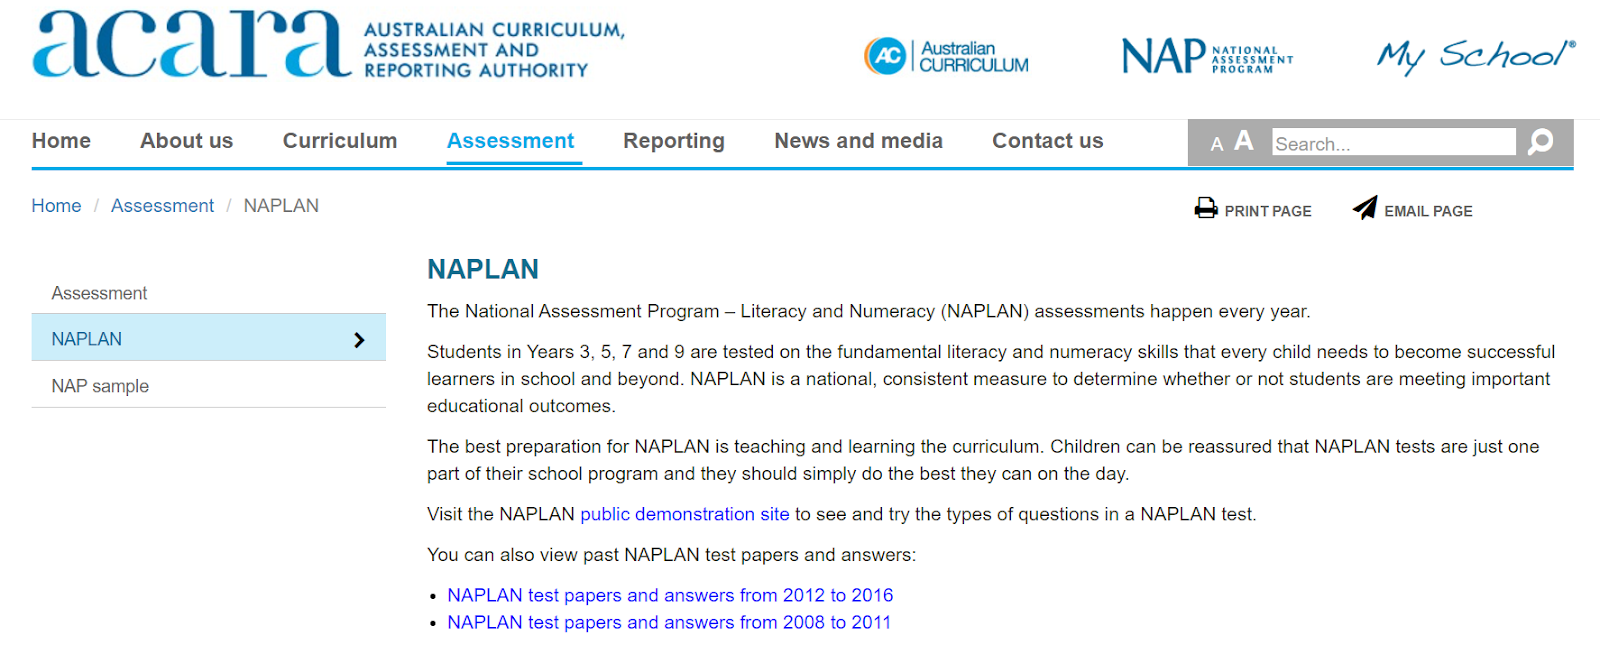 ACARA website - About NAPLAN page